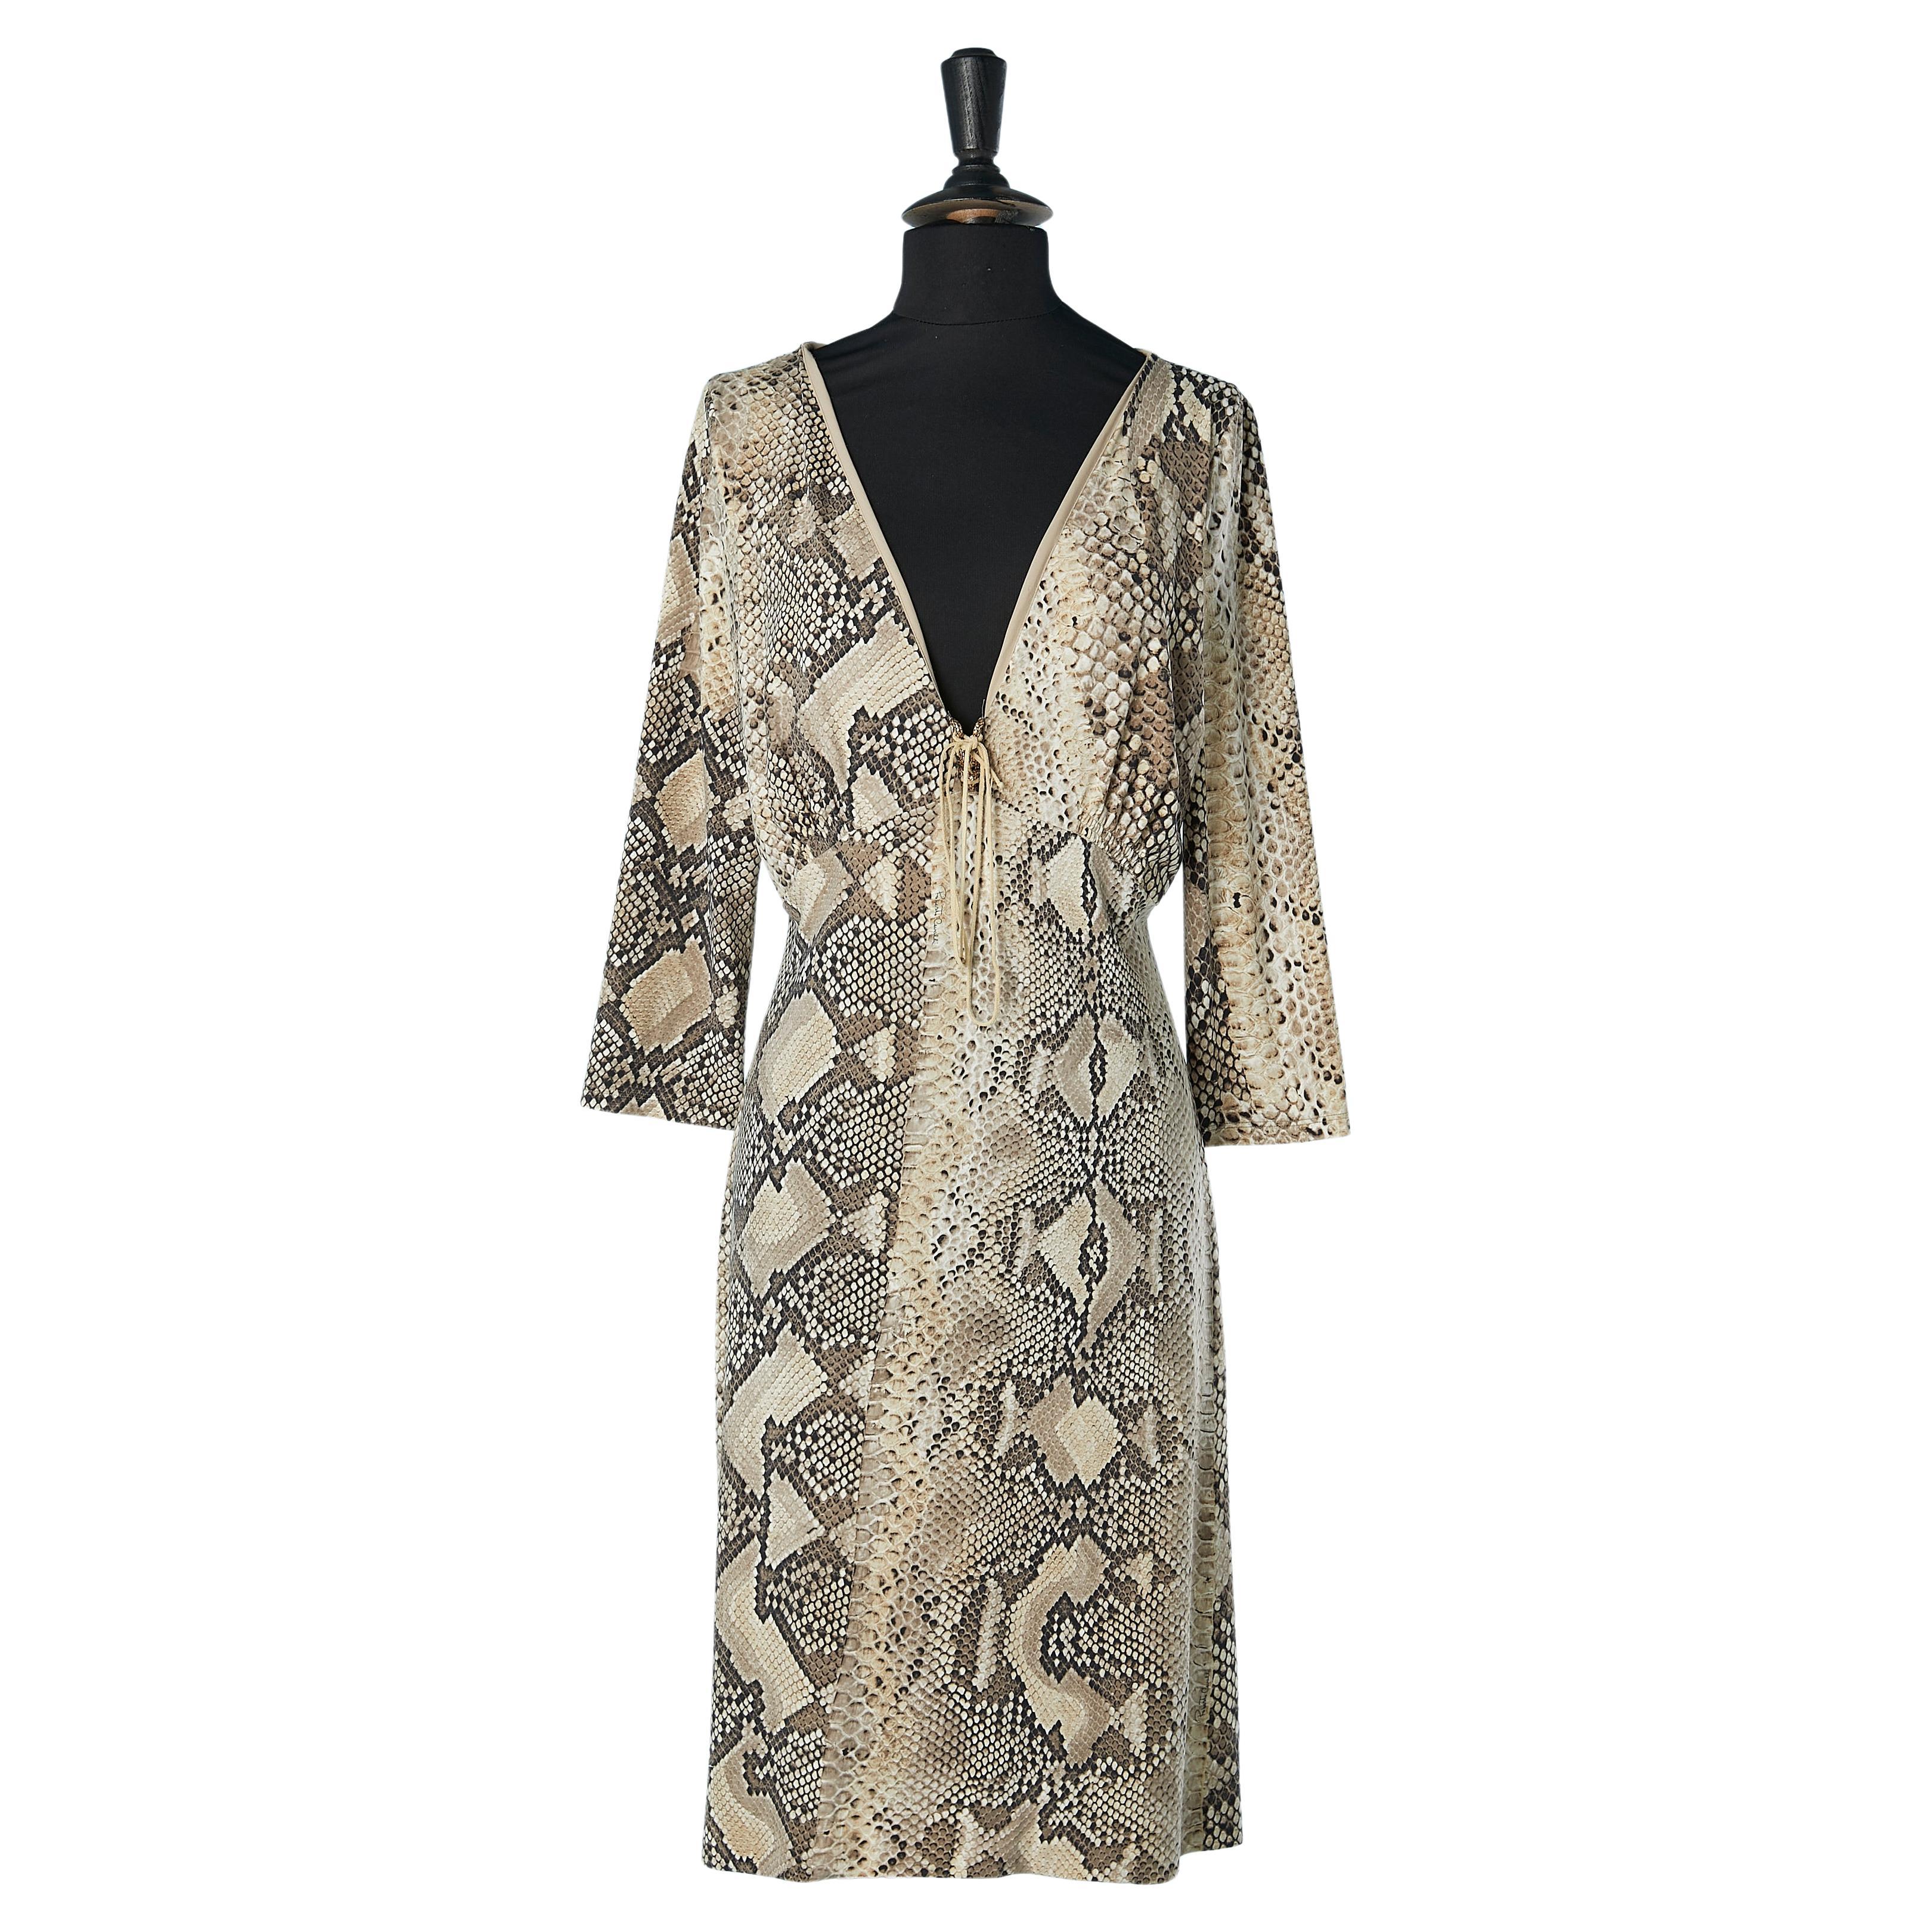 Animal print jersey dress with gold metal snake detail on bust Roberto Cavalli  For Sale